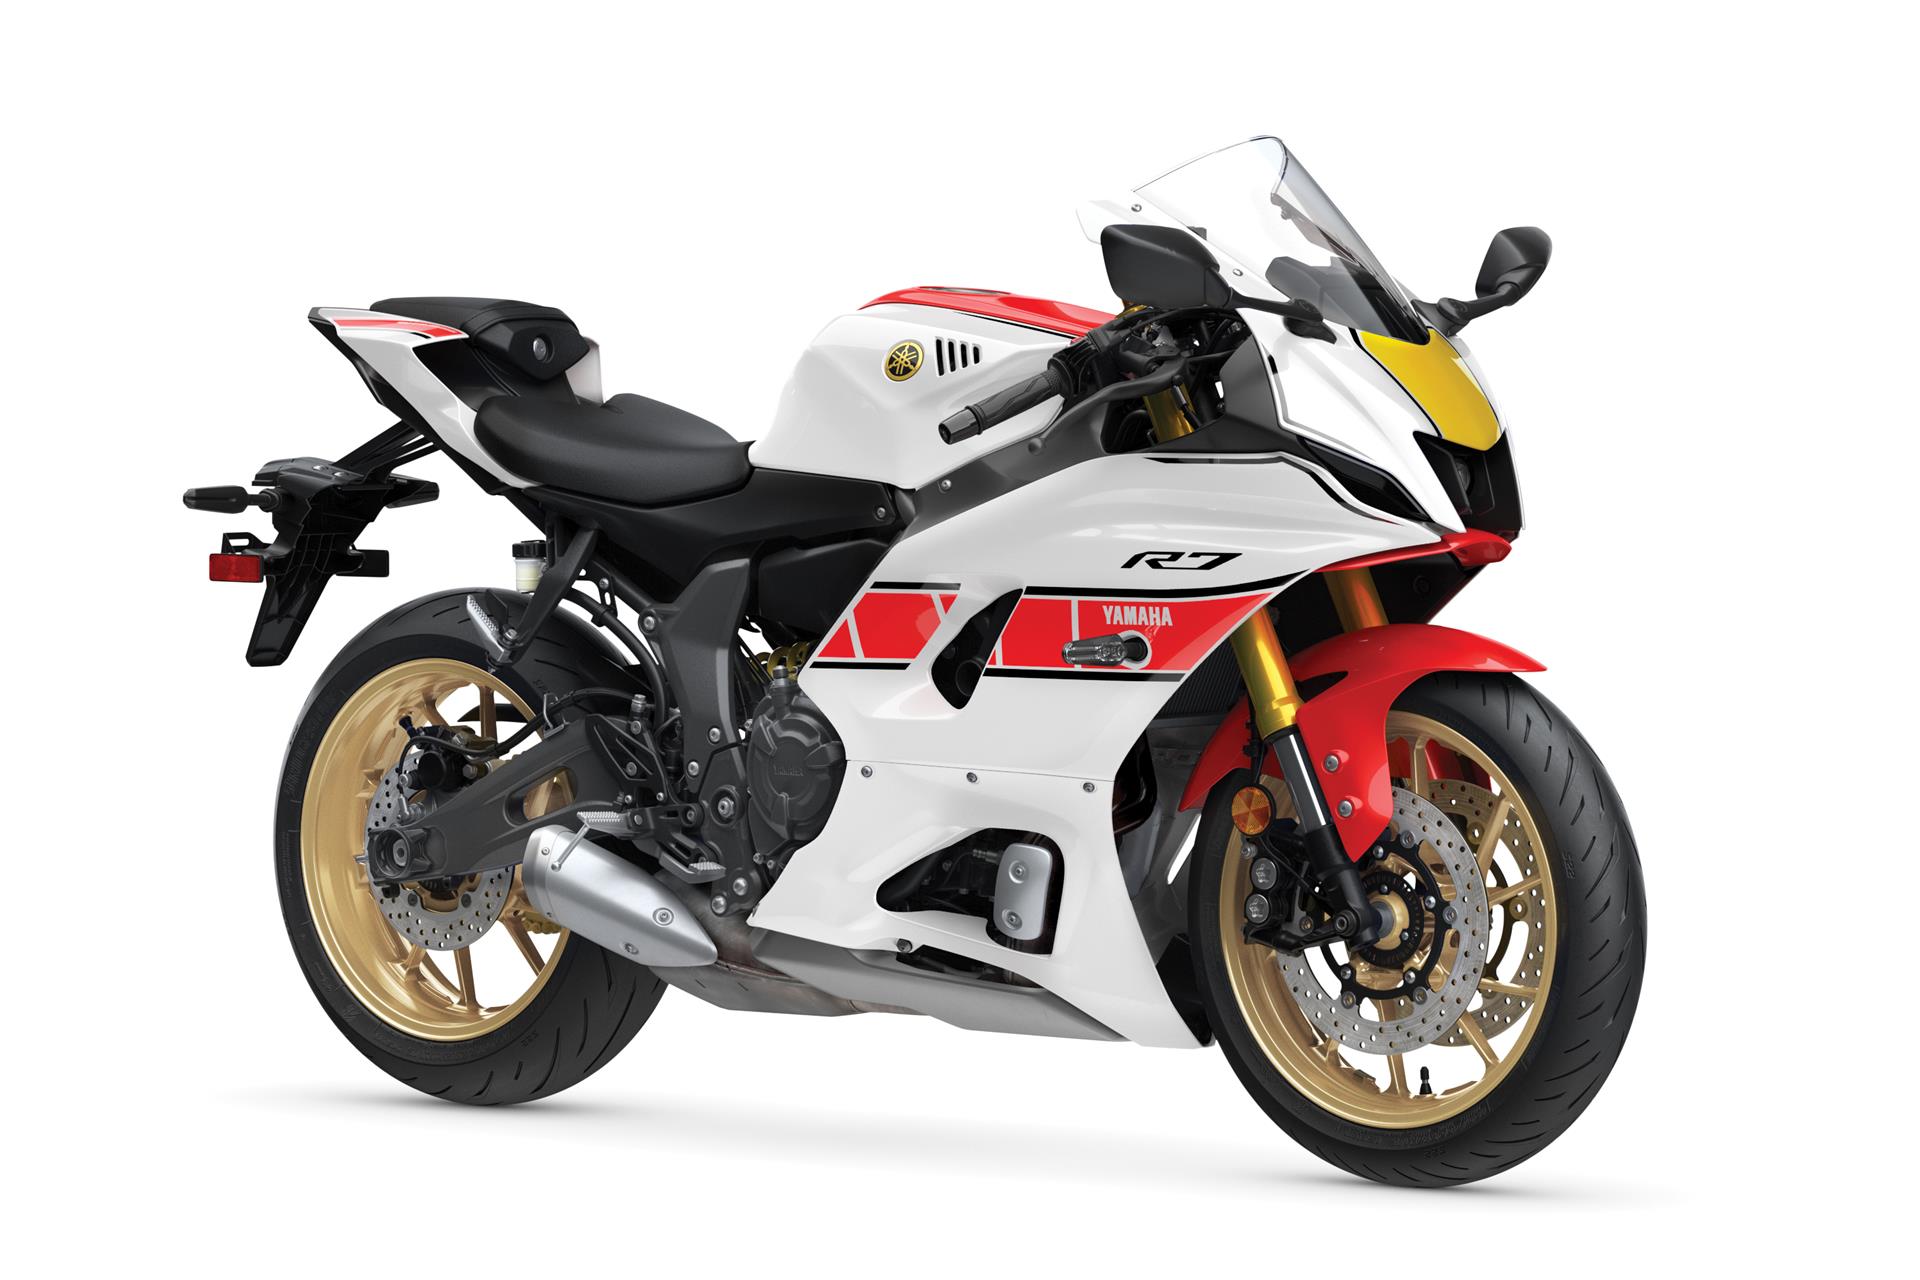 2022 Yamaha R7 World GP 60th Anniversary Edition in Heritage Red and White Studio Glamour Shot